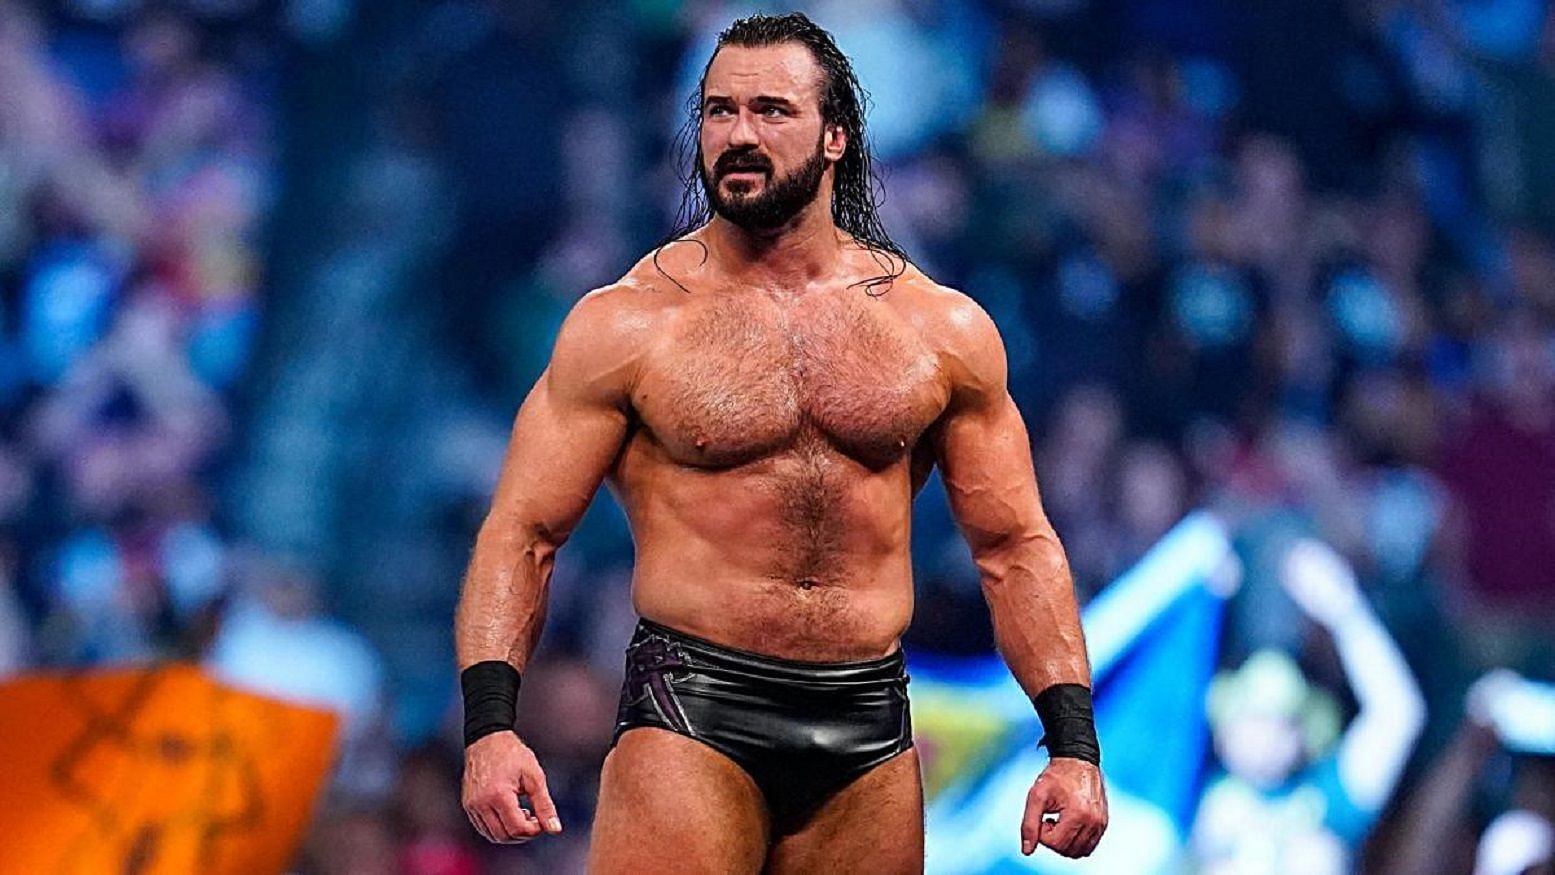 Drew McIntyre has become one of the top stars in WWE.